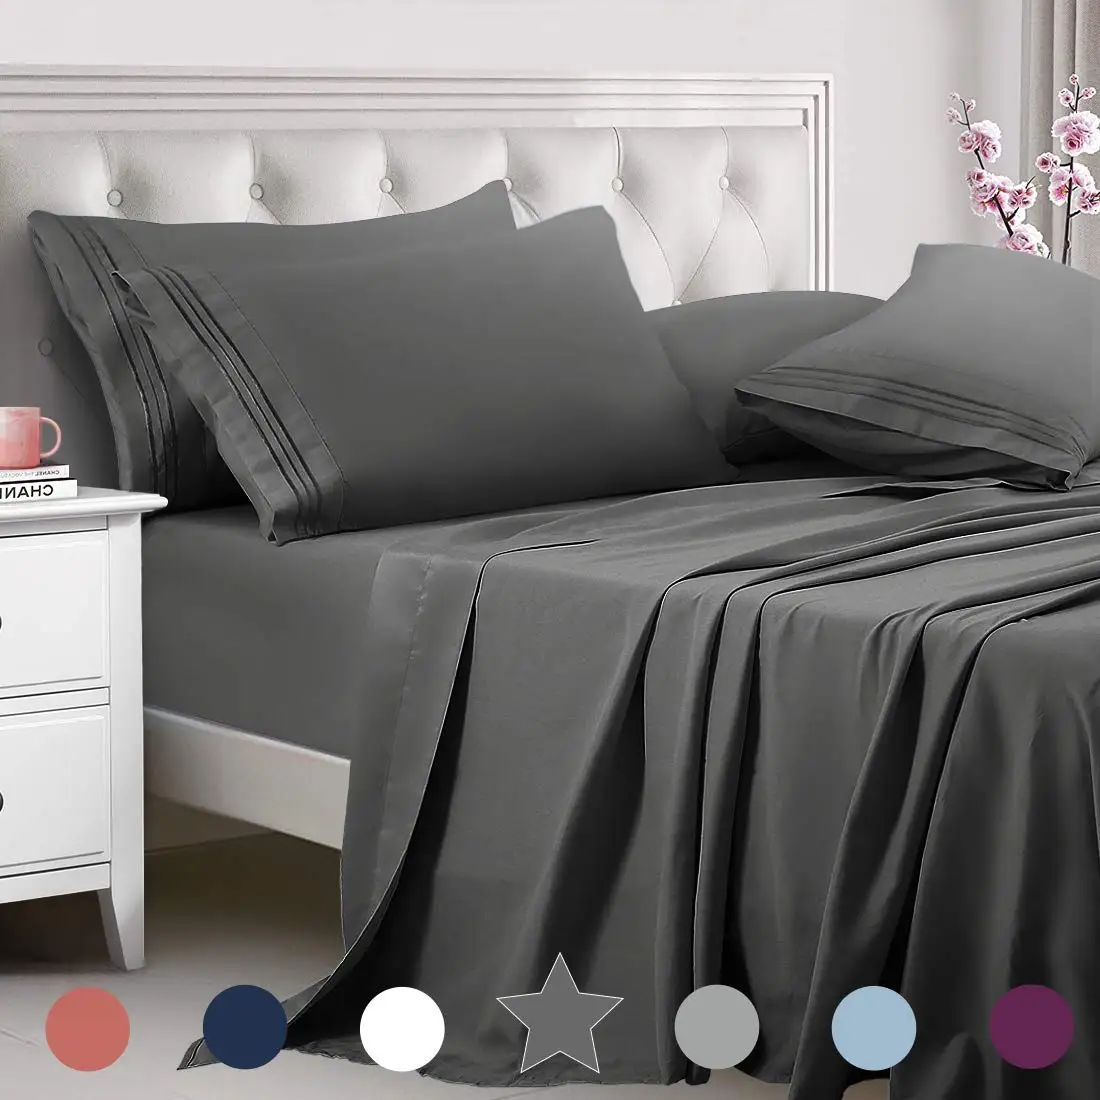 2023 Premium Soft 4Pcs Bed Sheet Set 1800TC Flat/Fitted Sheets with Pillowcases Single Double Queen King Size Multi-Color